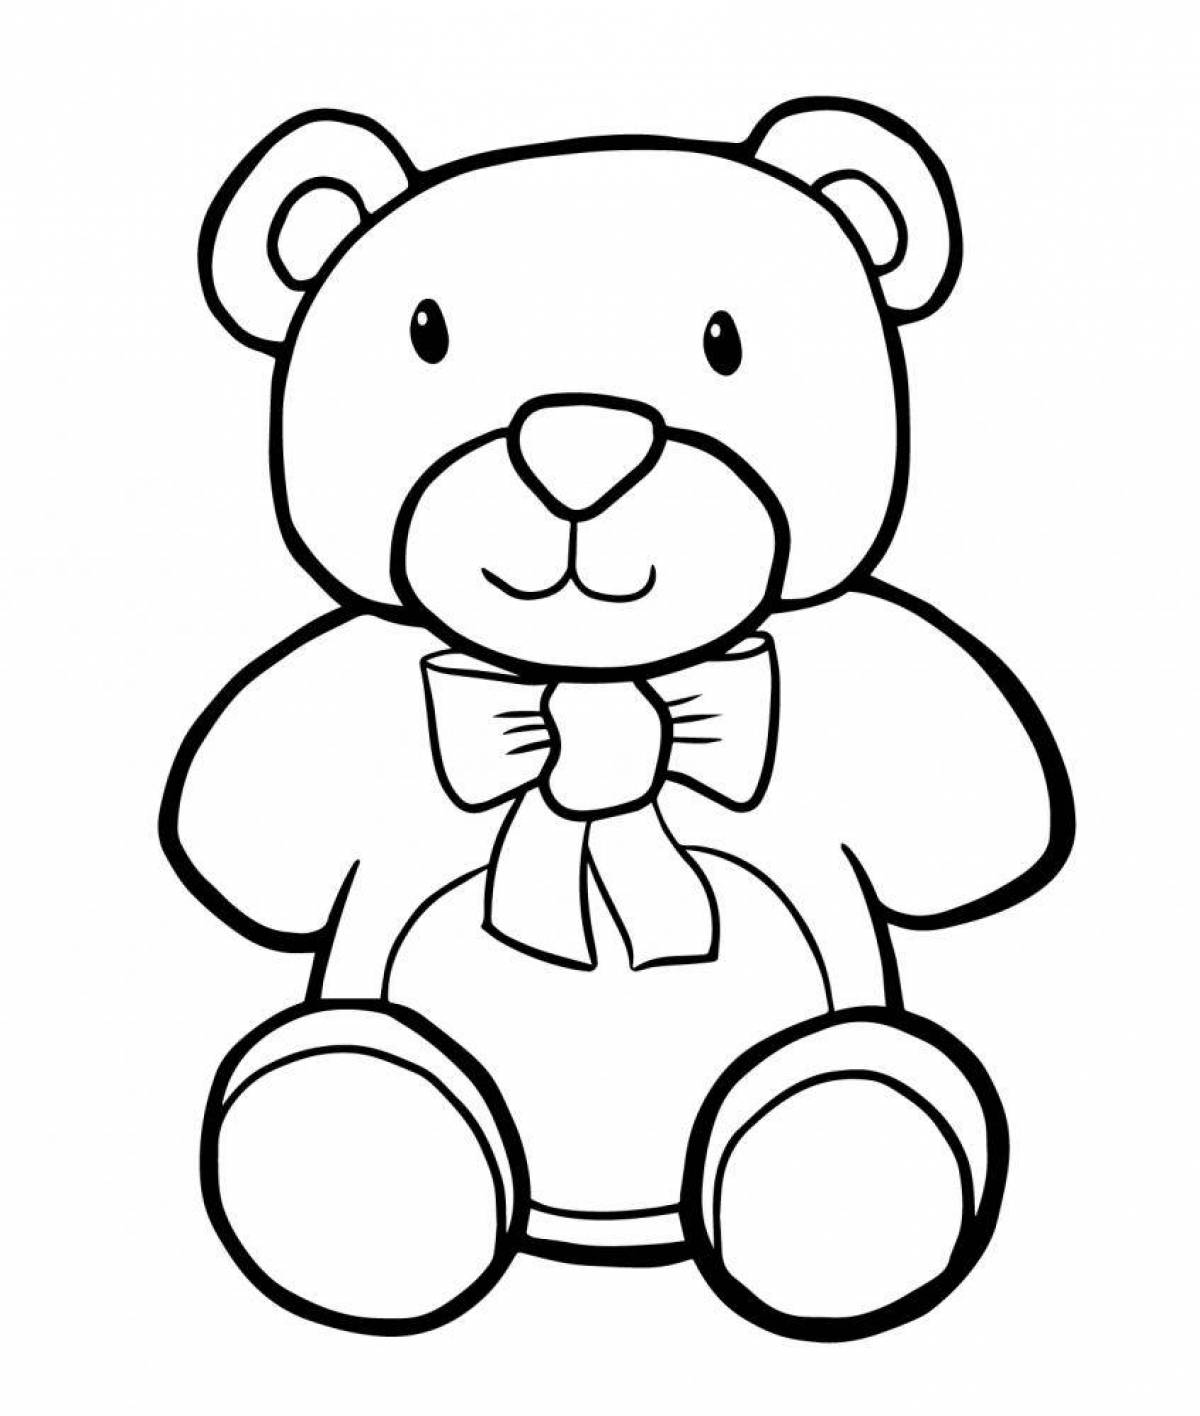 Cute teddy bear coloring book for kids